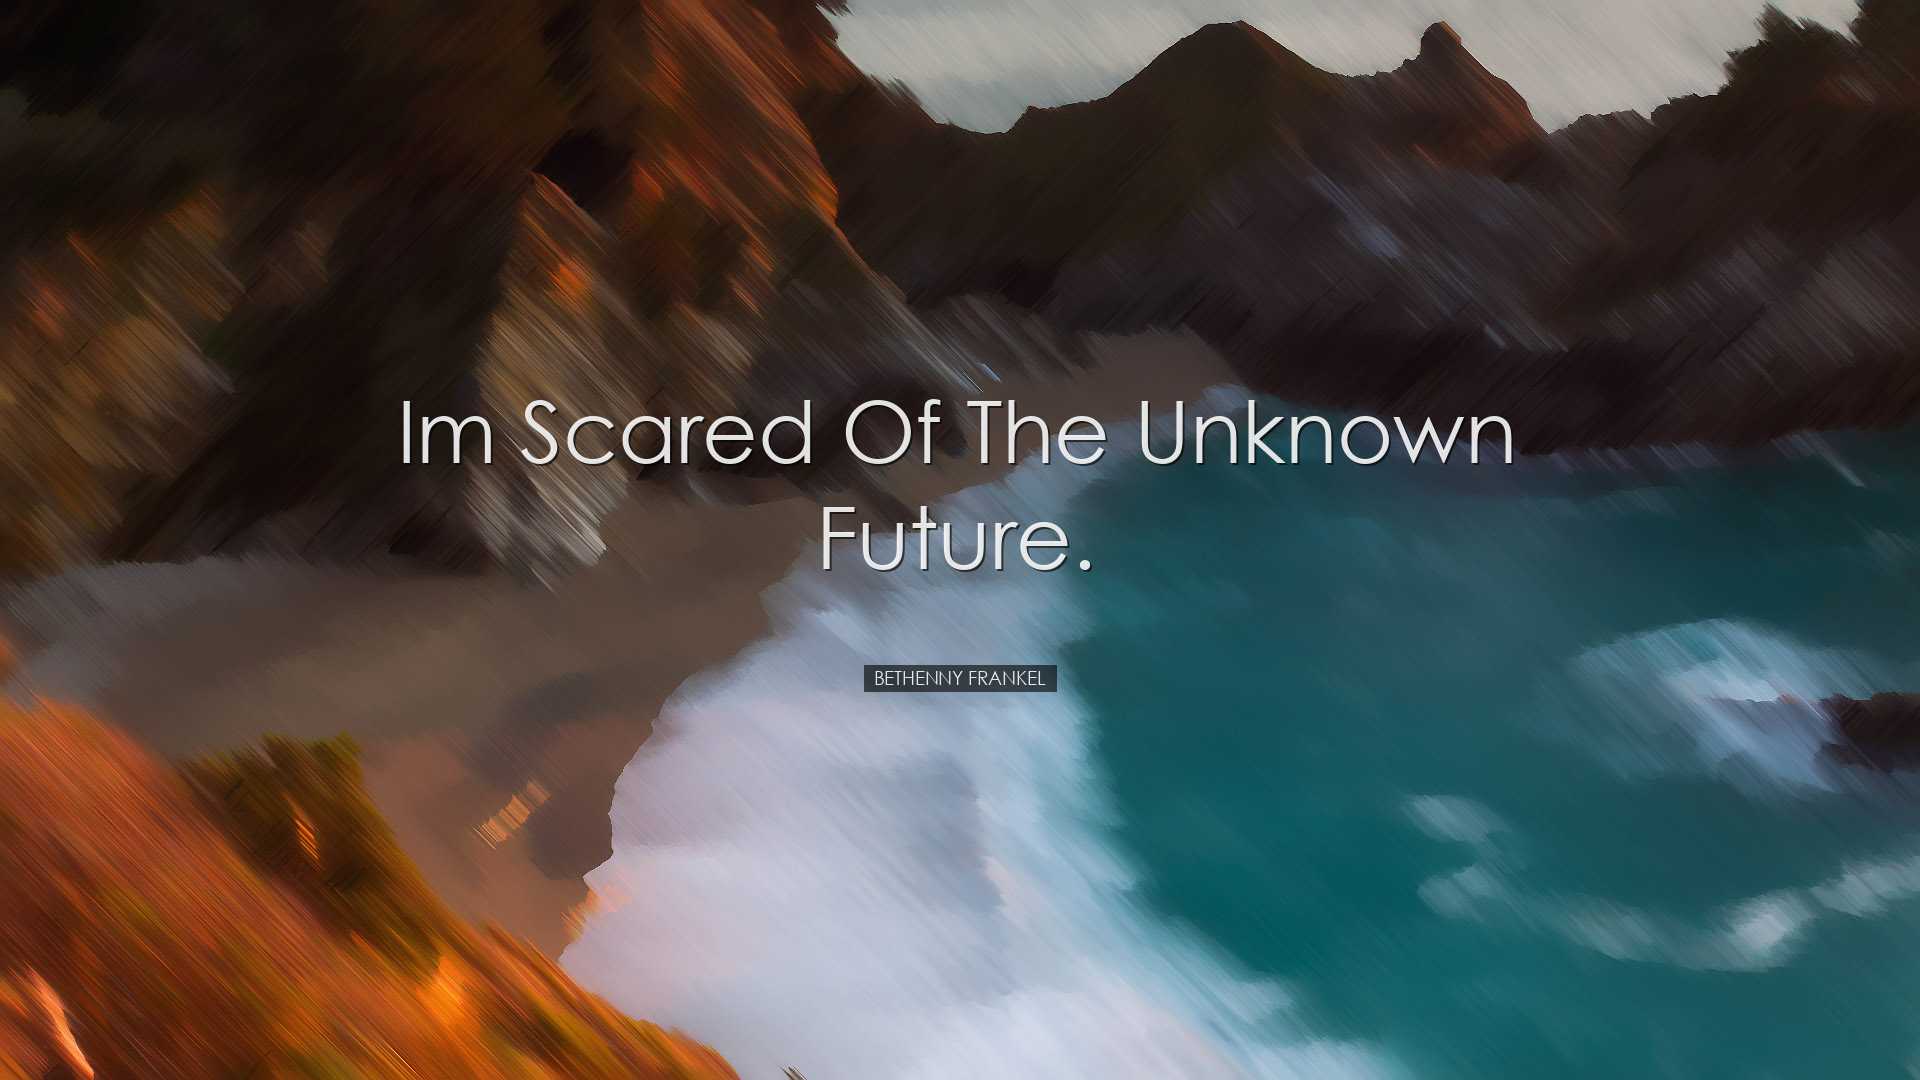 Im scared of the unknown future. - Bethenny Frankel